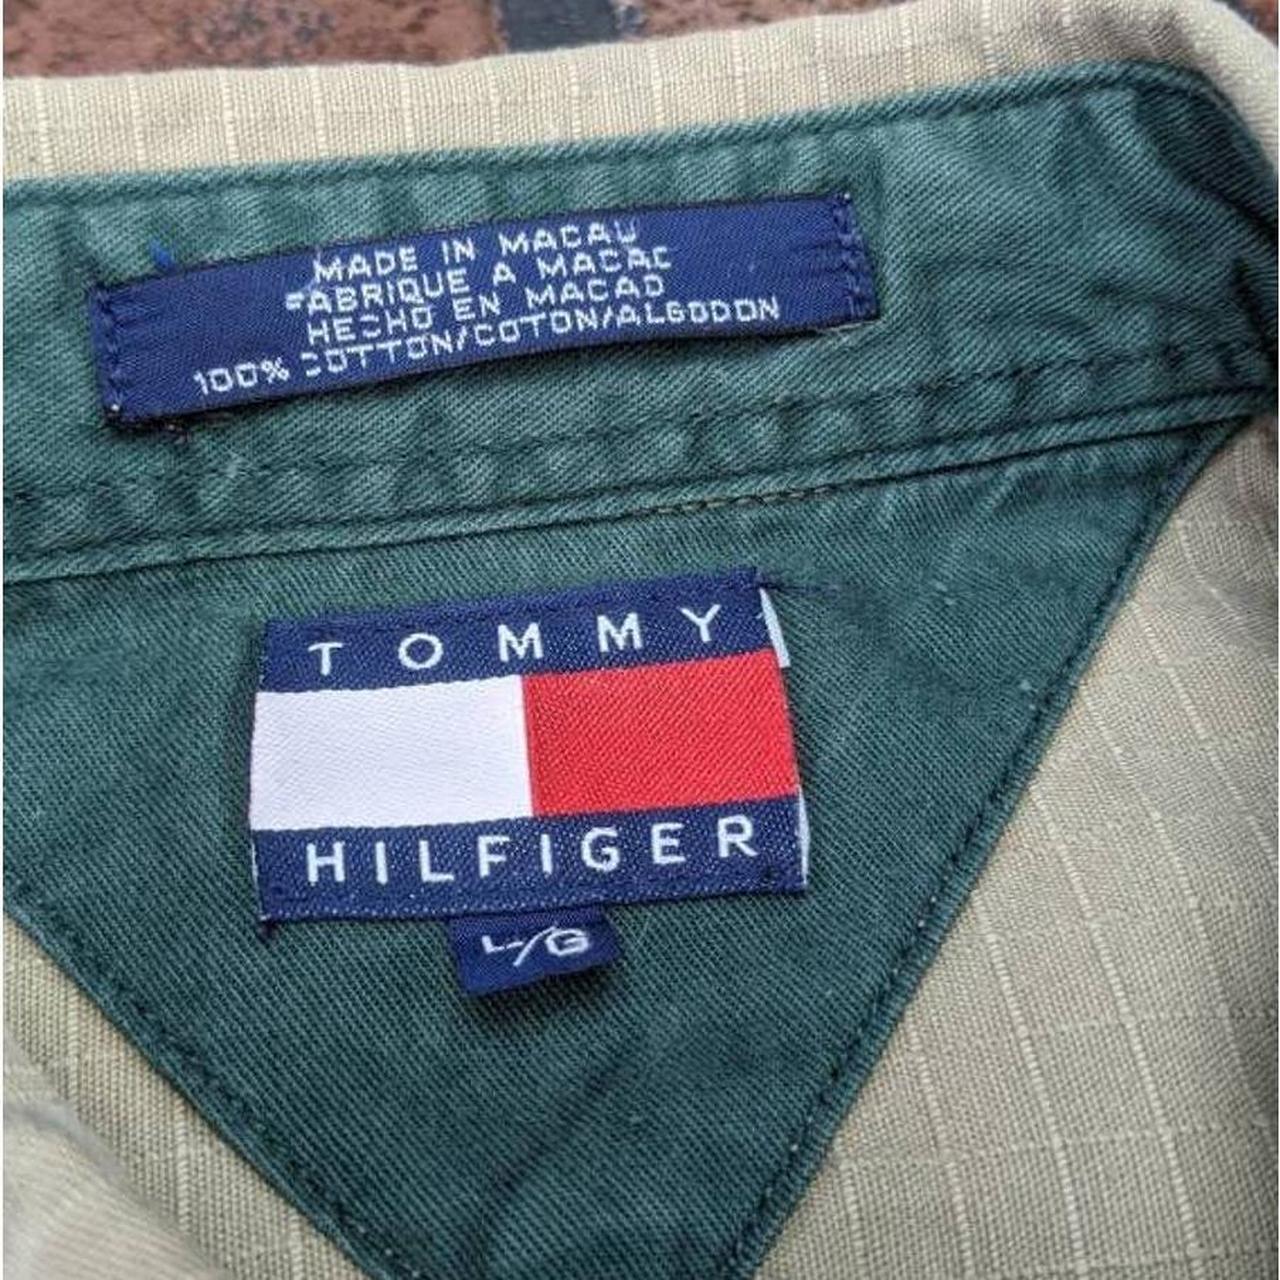 Tommy Hilfiger Rare Outdoors Expedition Patrol... - Depop